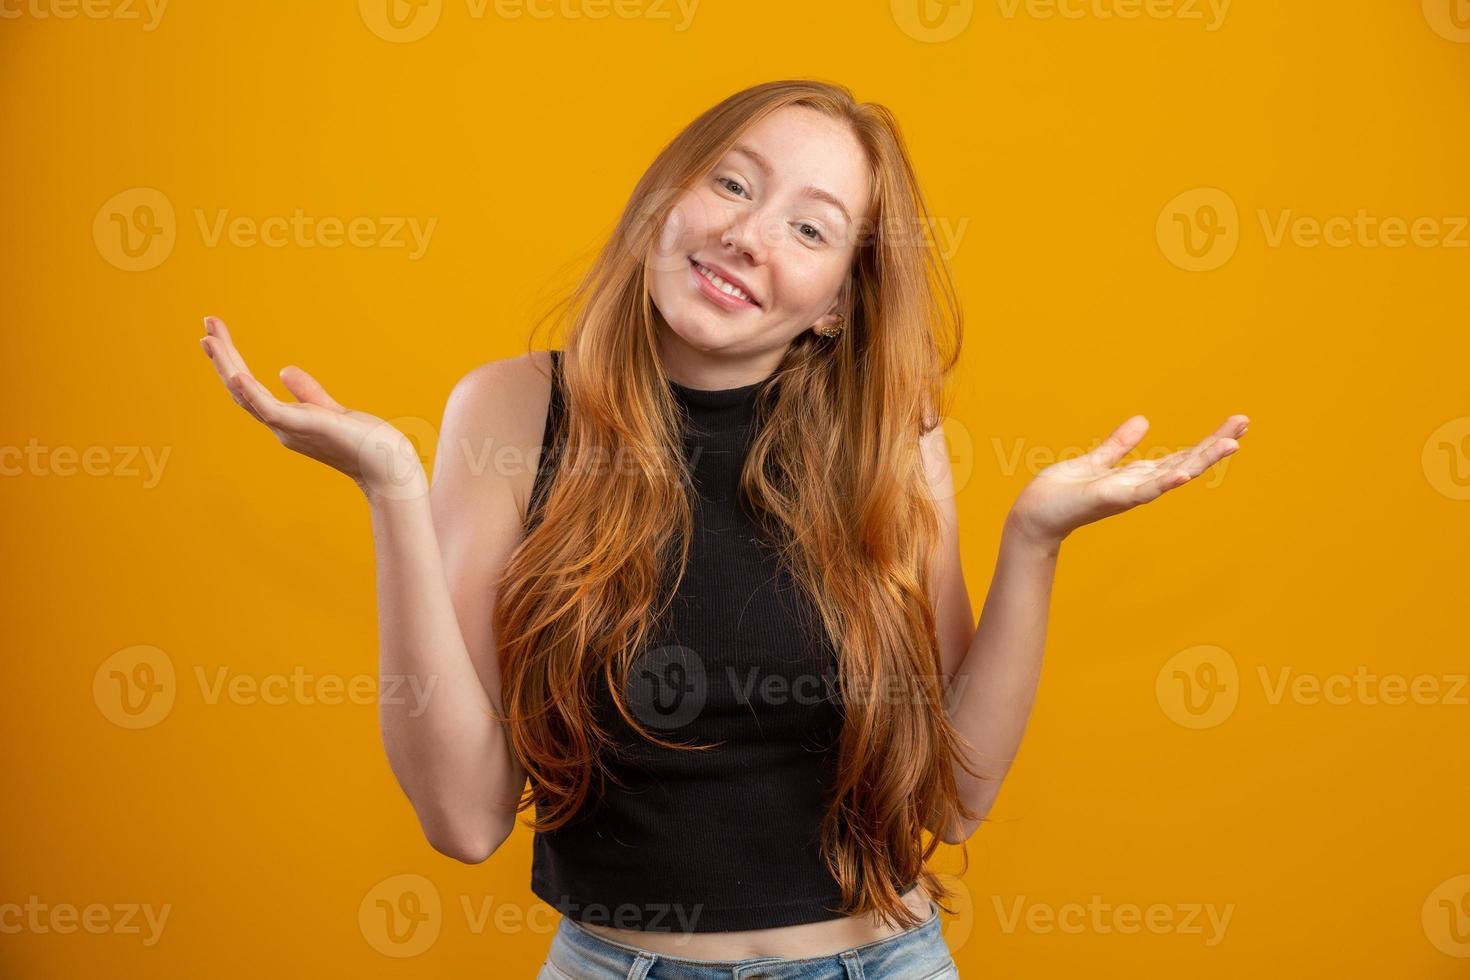 Overwhelmed excited smiling, happy redhead girl celebrating amazing news, achieve victory, winning competition, triumphing as become champion, gain goal or unexpected lucky event happened. On yellow. photo